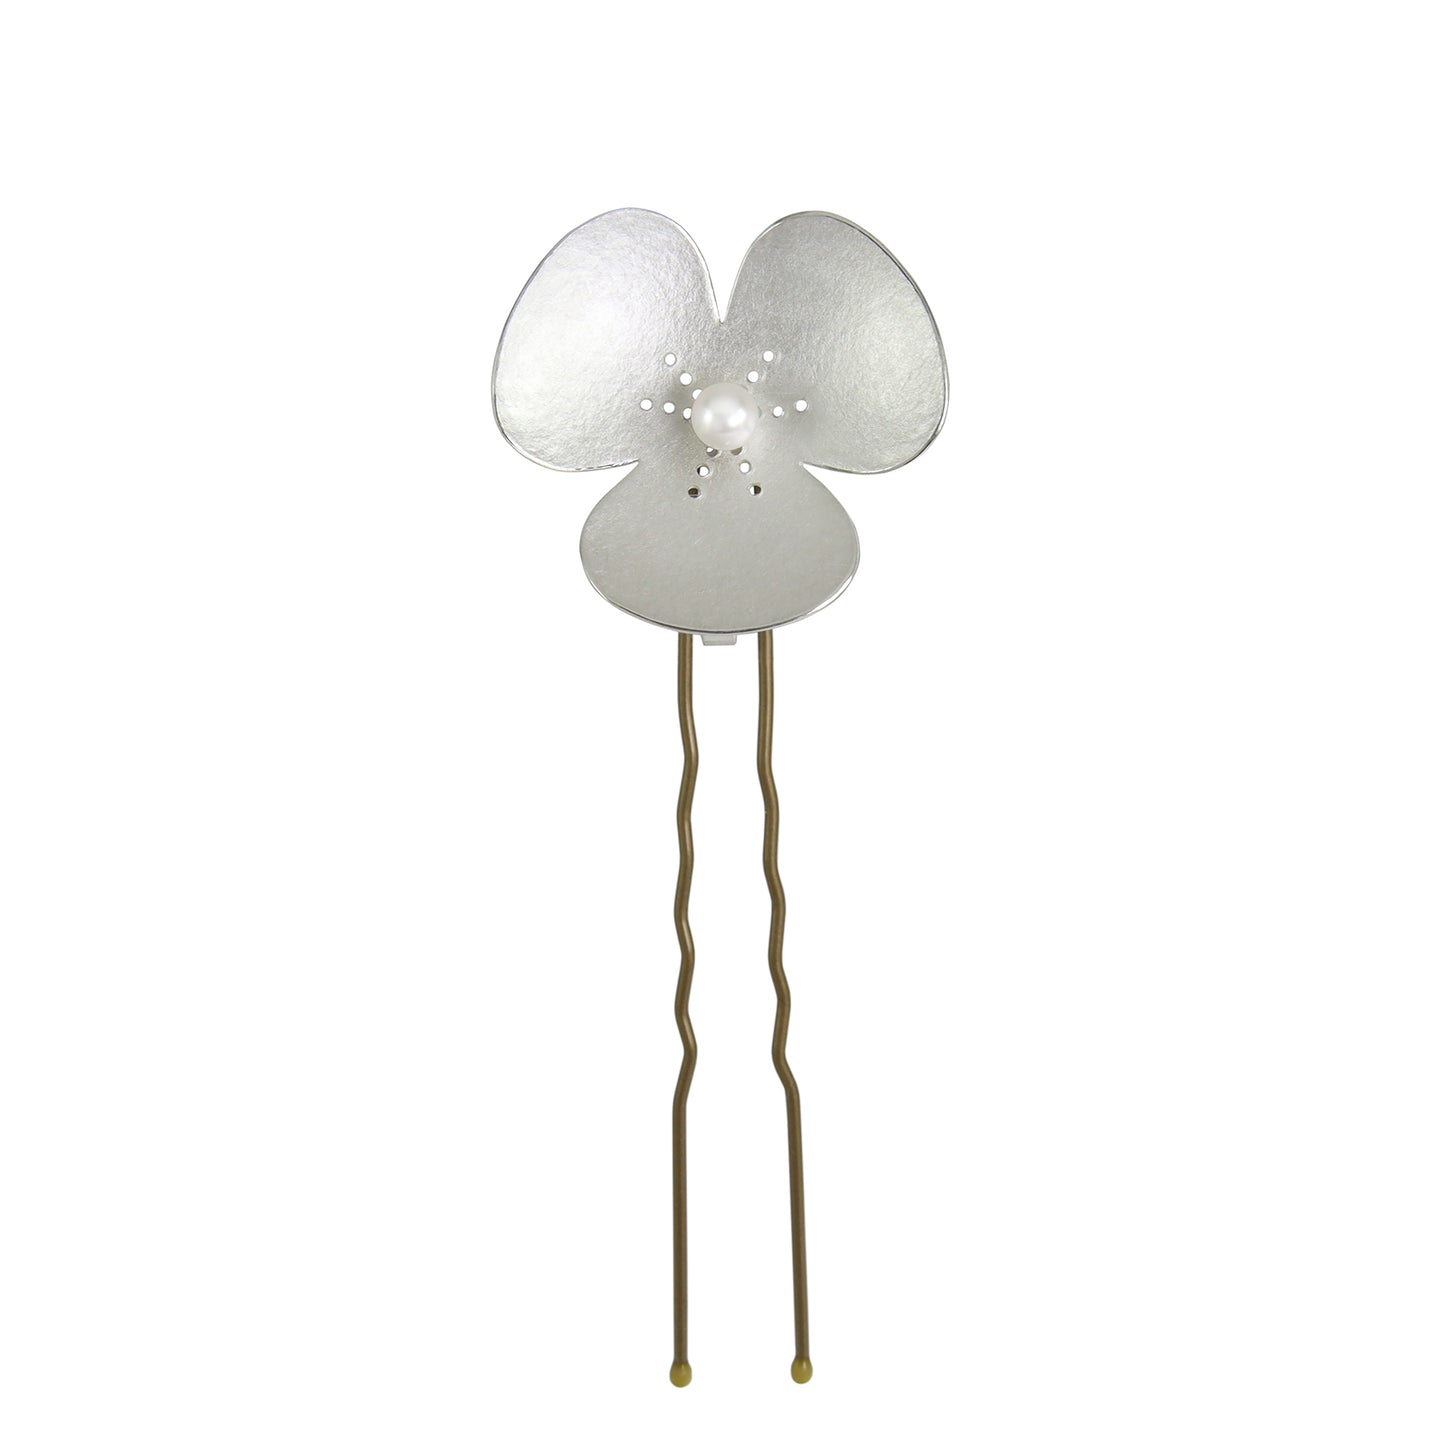 Single Silver and Pearl Poppy hairpin, which becomes a pendant